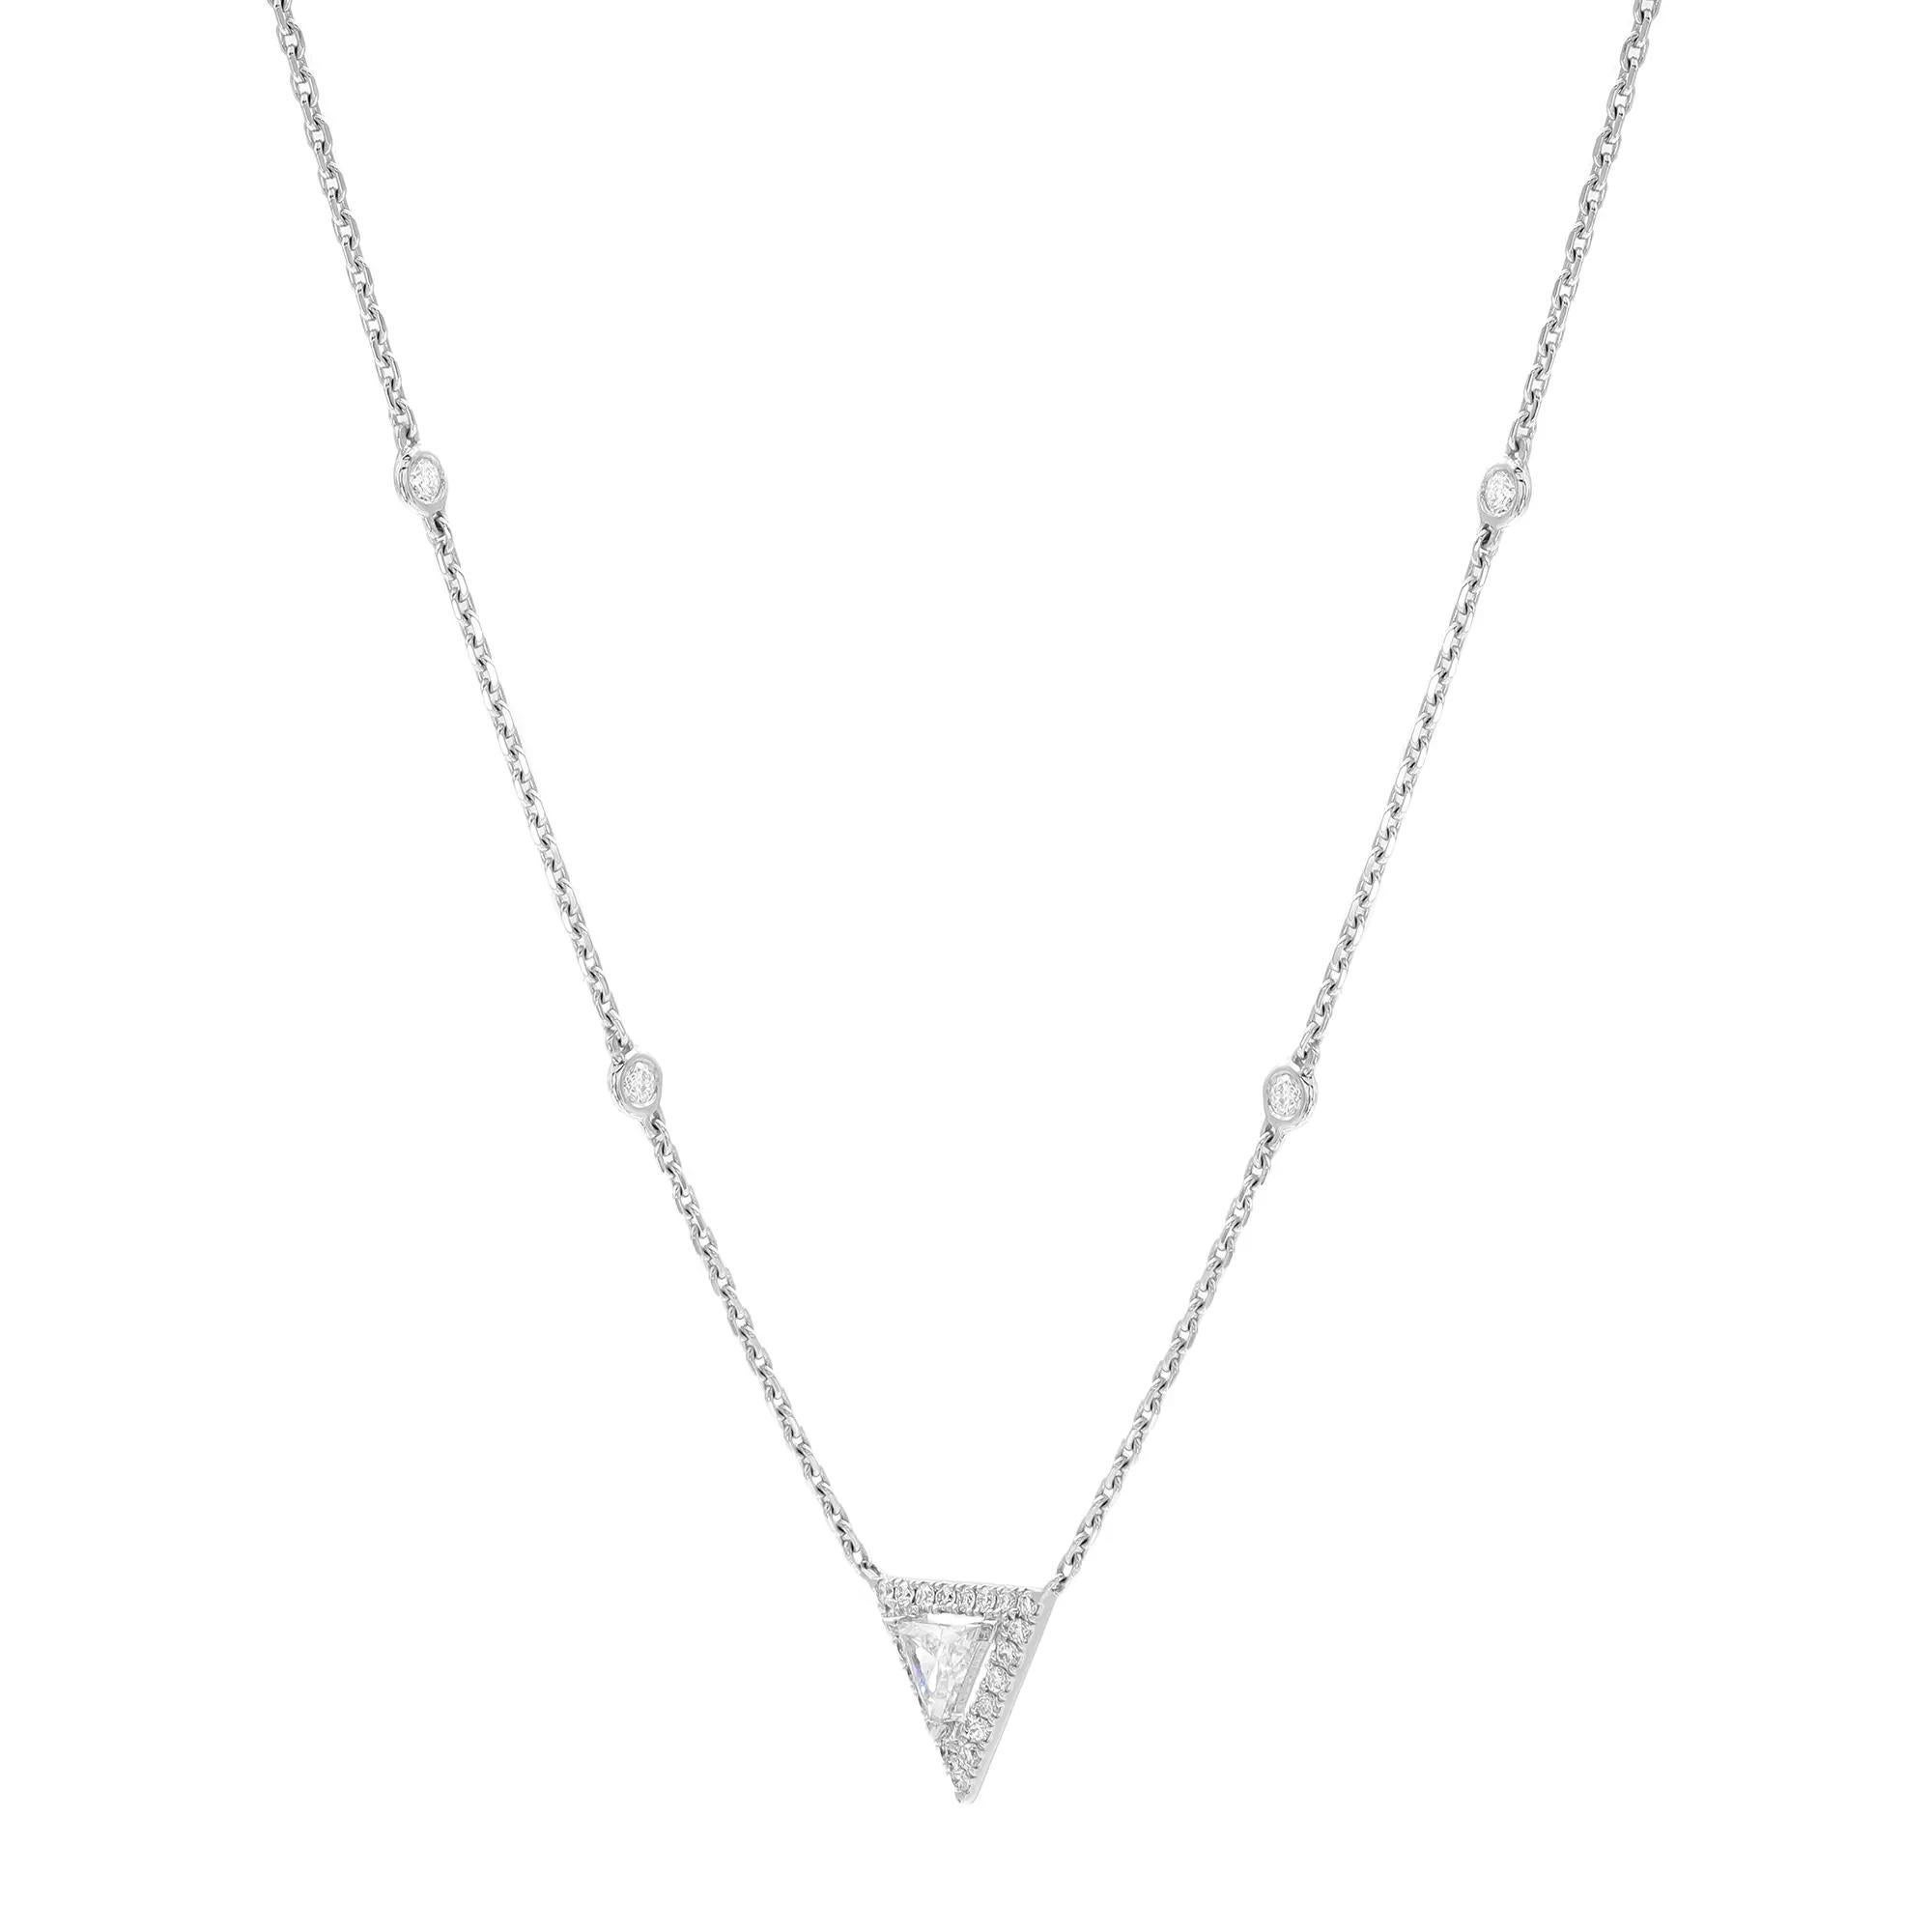 Moderne Messika 0.47Cttw Thea Diamond Chain Necklace 18K White Gold 17.5 Inches en vente